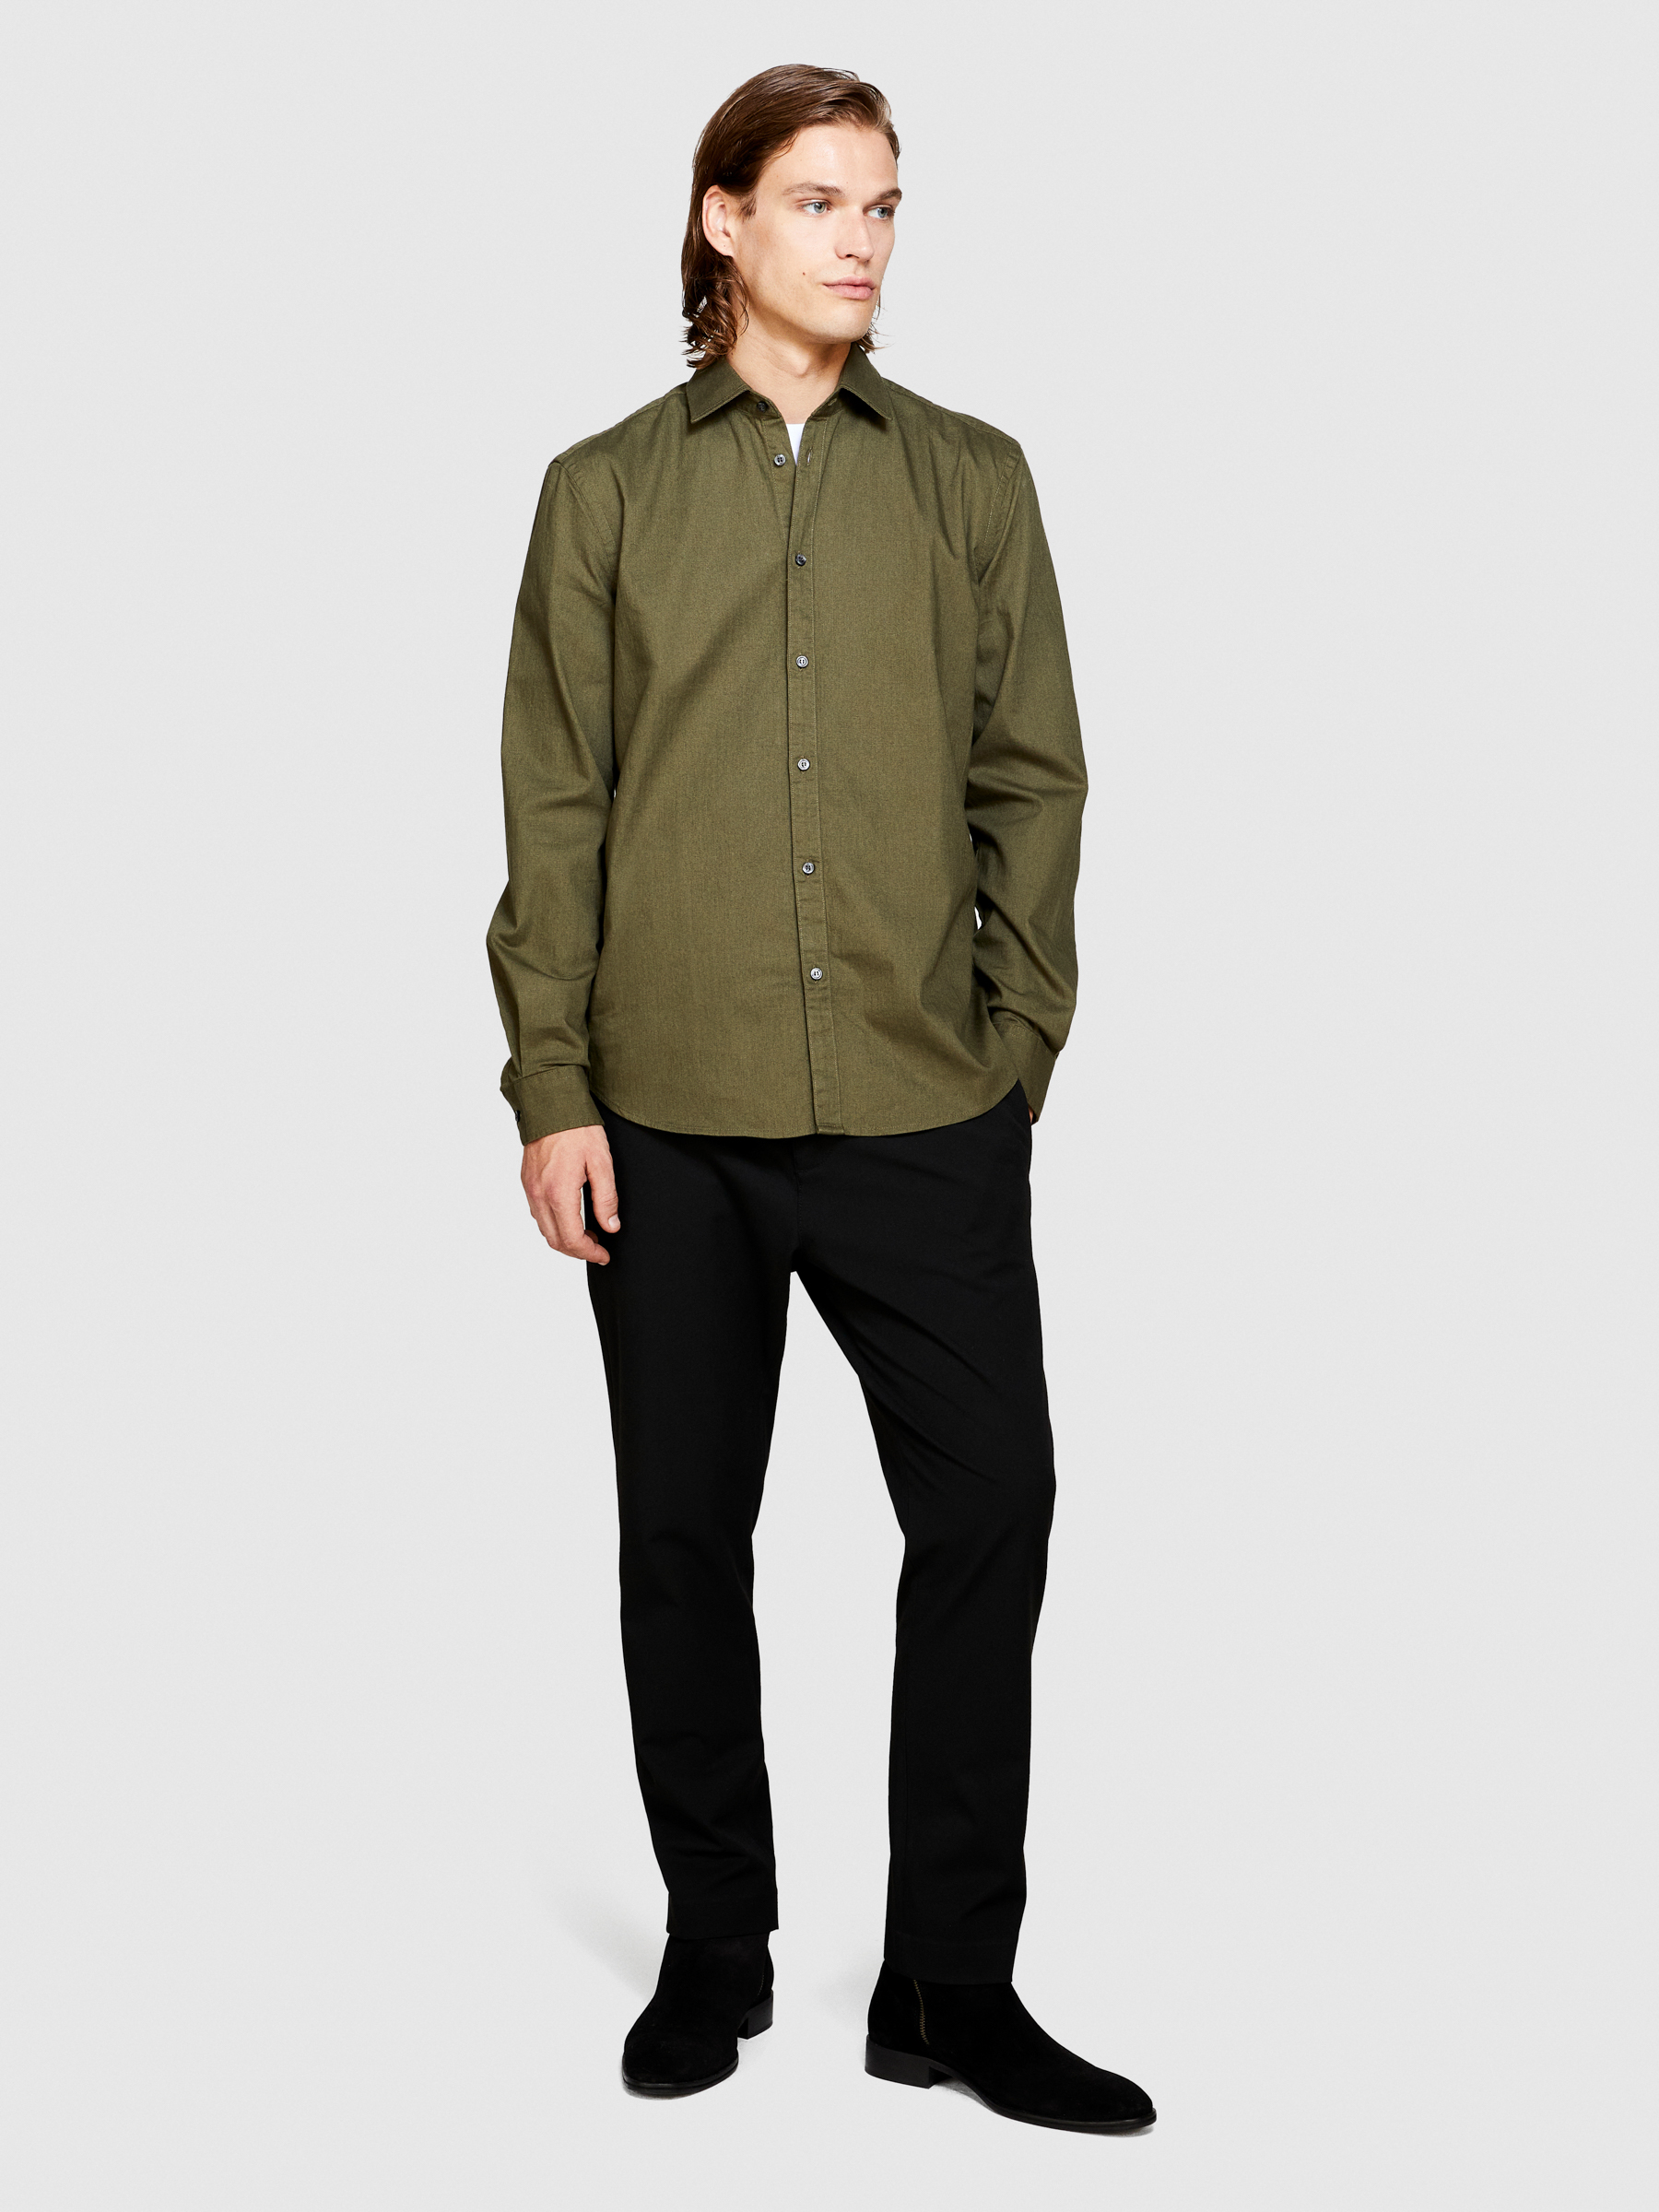 Sisley - Solid Colored Shirt, Man, Military Green, Size: 40